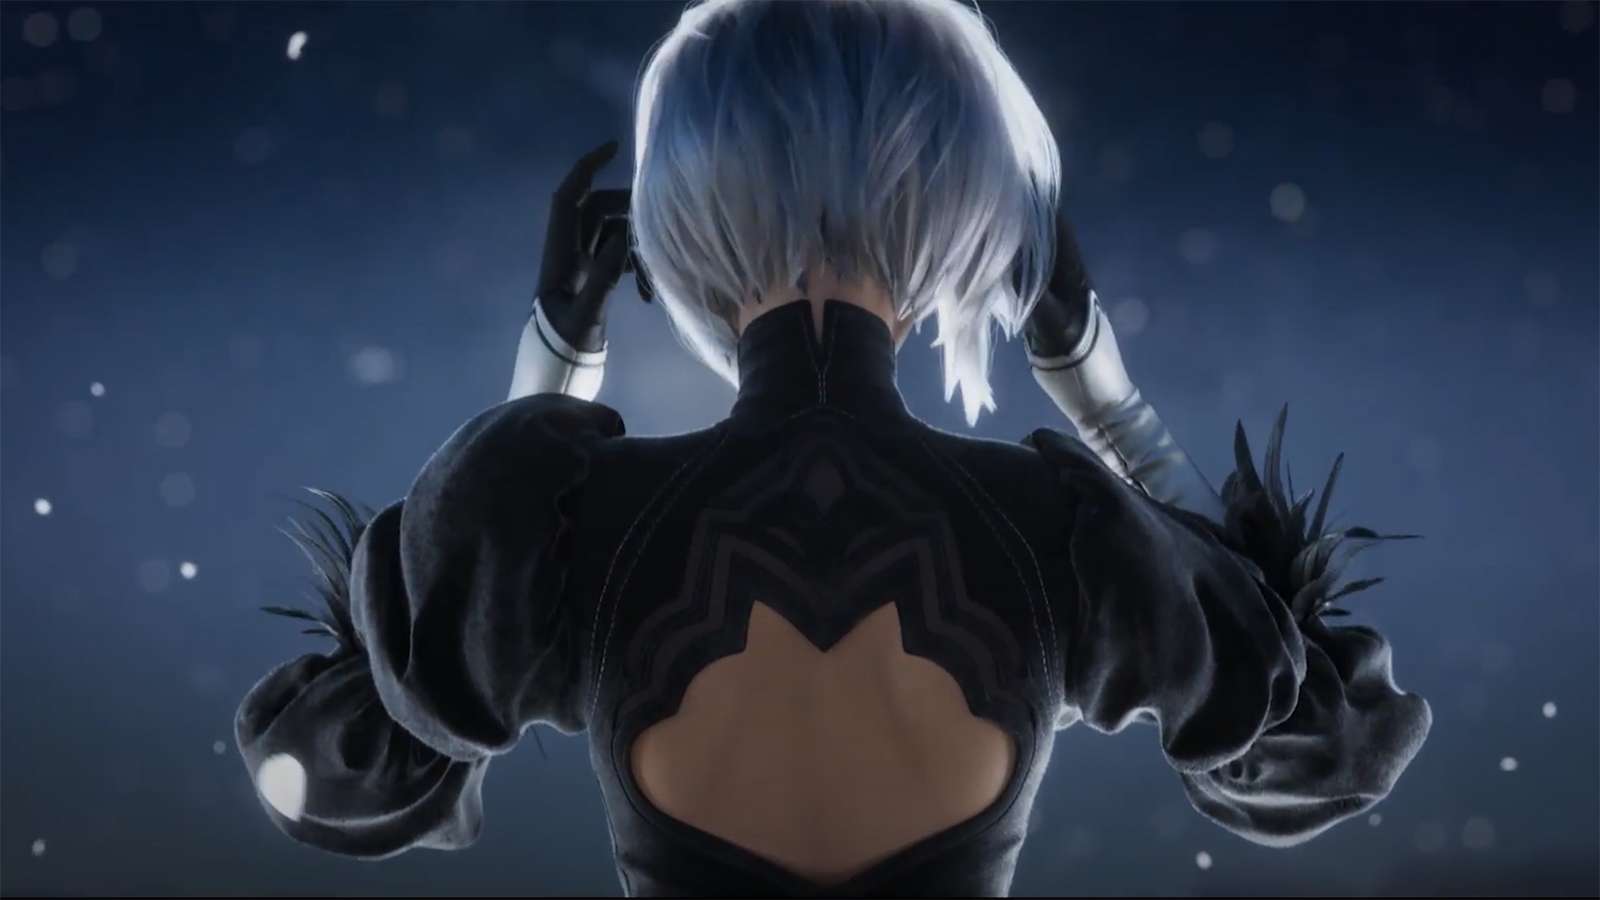 A screenshot from a trailer of a character from Nier